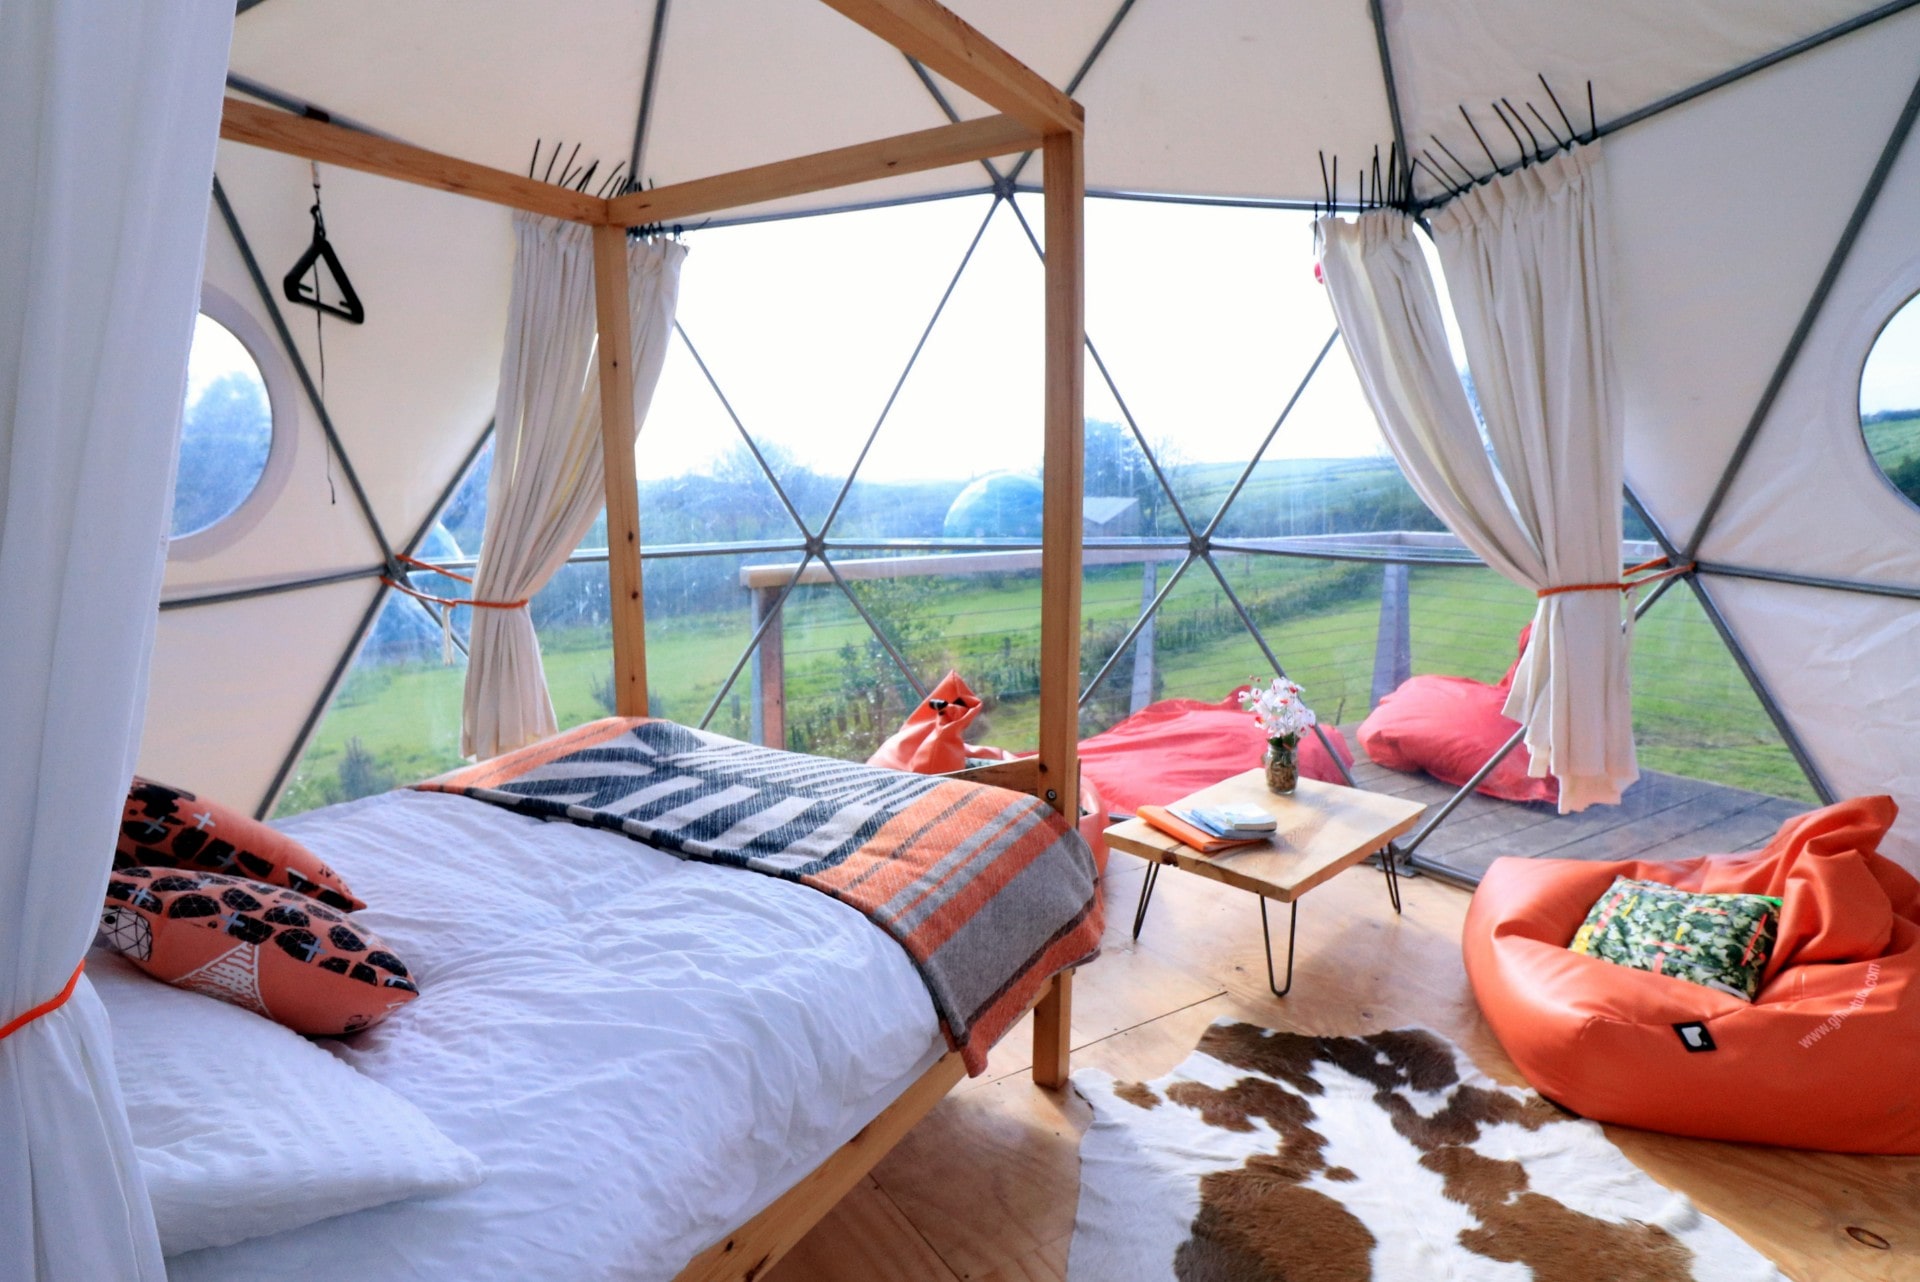 inside-a-quirky-geodome-glamping-site-in-a-field-with-a-four-poster-bed-loveland-farm-devon-unusual-romantic-weekend-breaks-uk